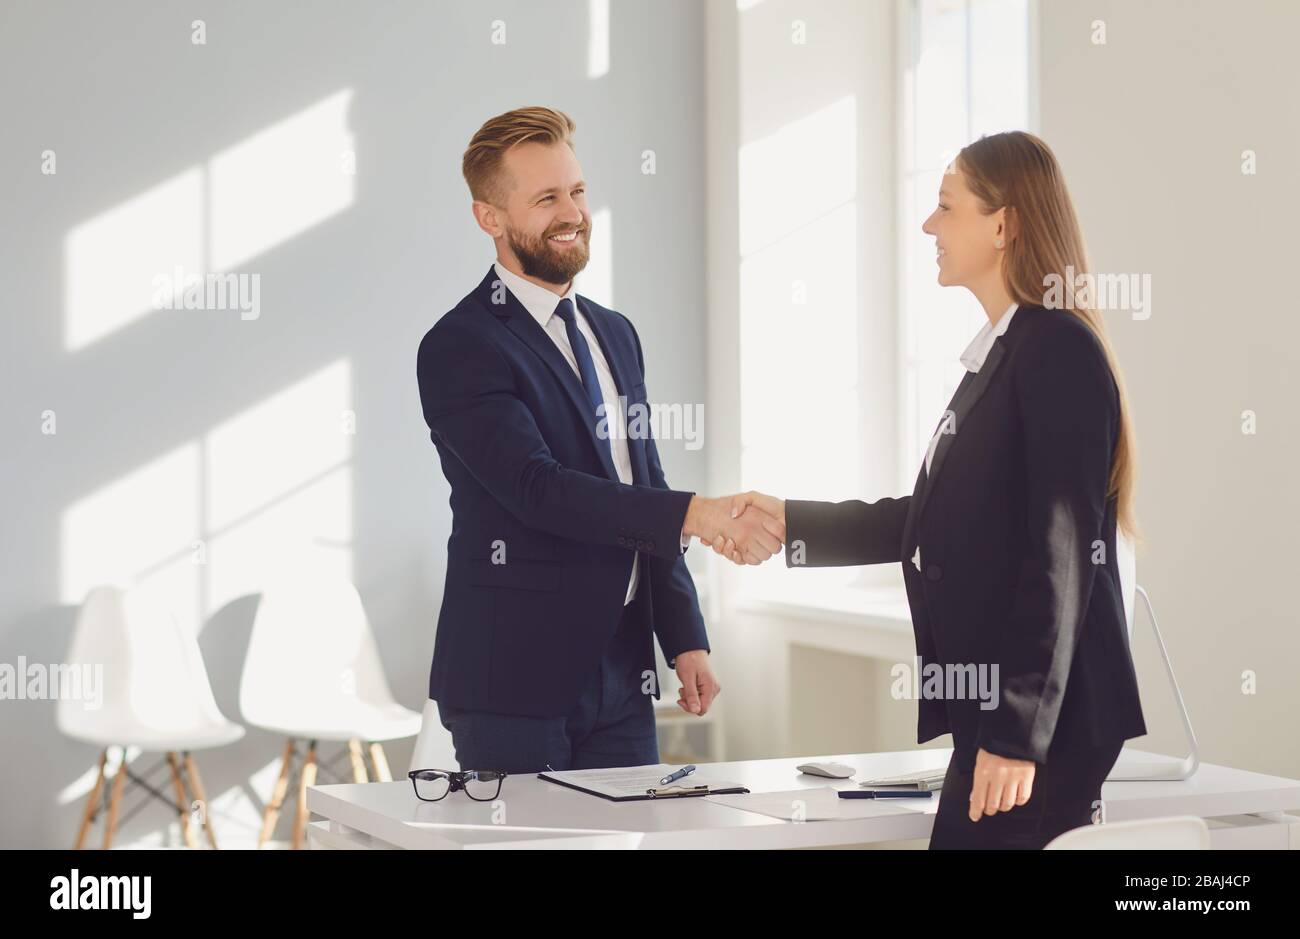 Successful office interview. The conclusion of the contract. Businessman and businesswoman handshake at the table after meeting. Stock Photo